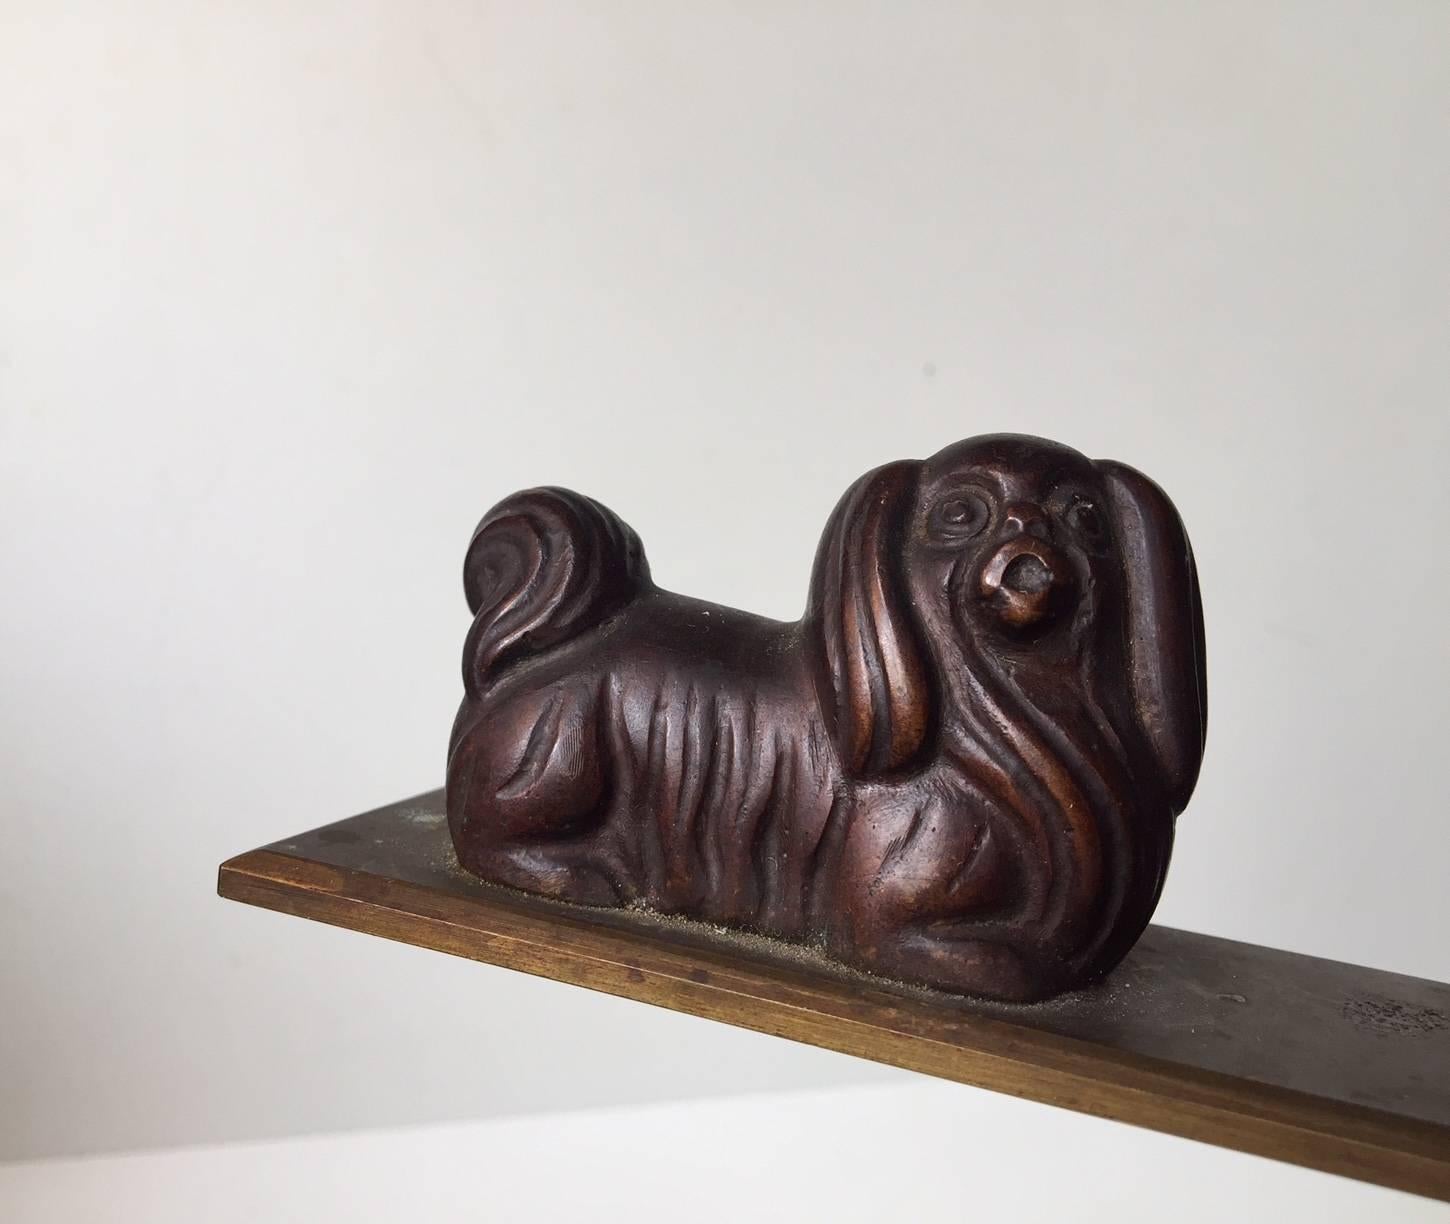 Very heavy desk ornament or paperweight composed of patinated bronze. Its depicting a Pekingese dog and a cat. It was manufactured in Scandinavia during the late 1920s or early 1930s.